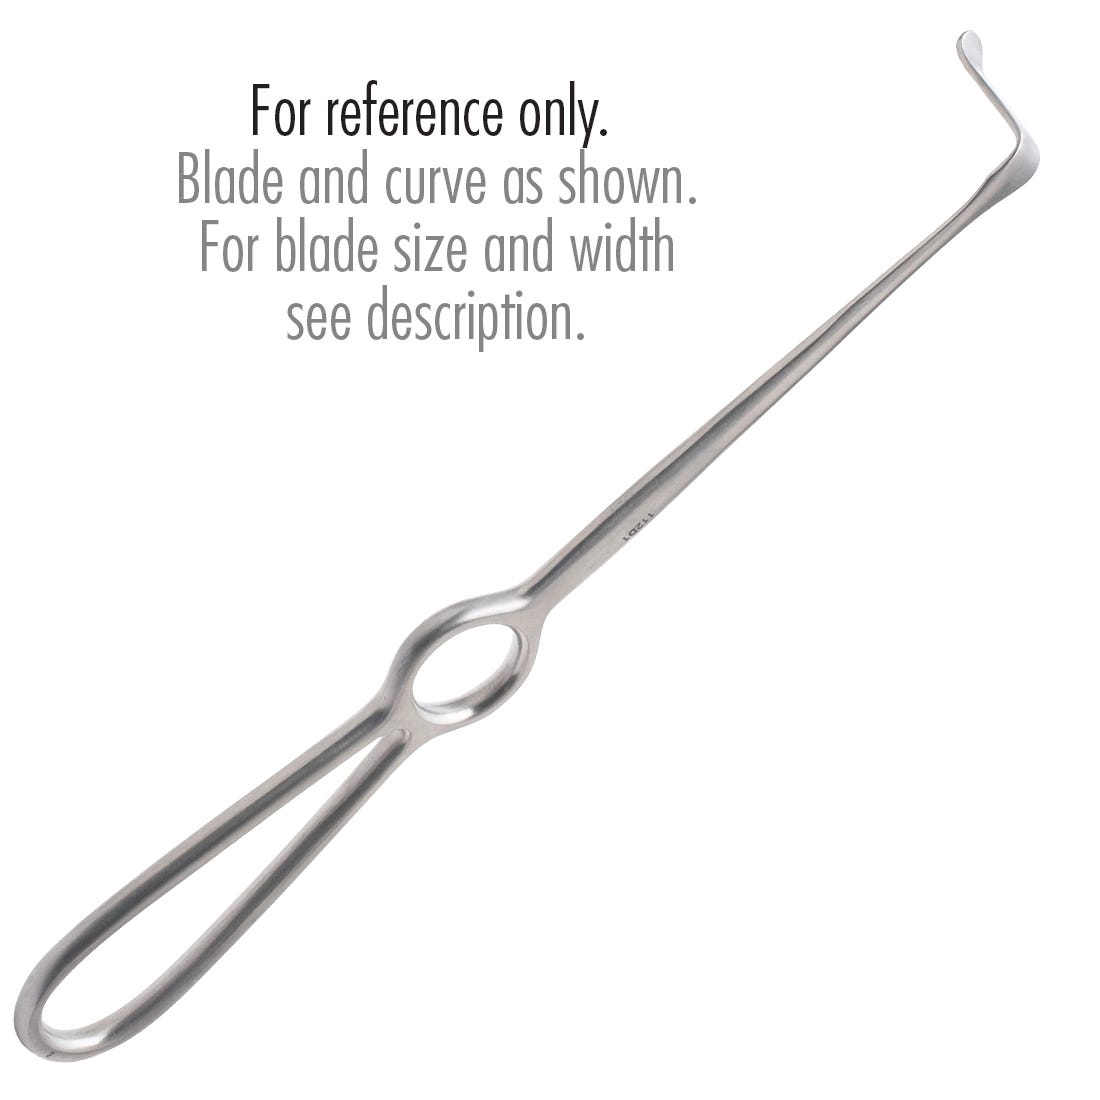 Obwegeser Type Surgical Retractor Standard, Curved Up, 14mm x 70mm